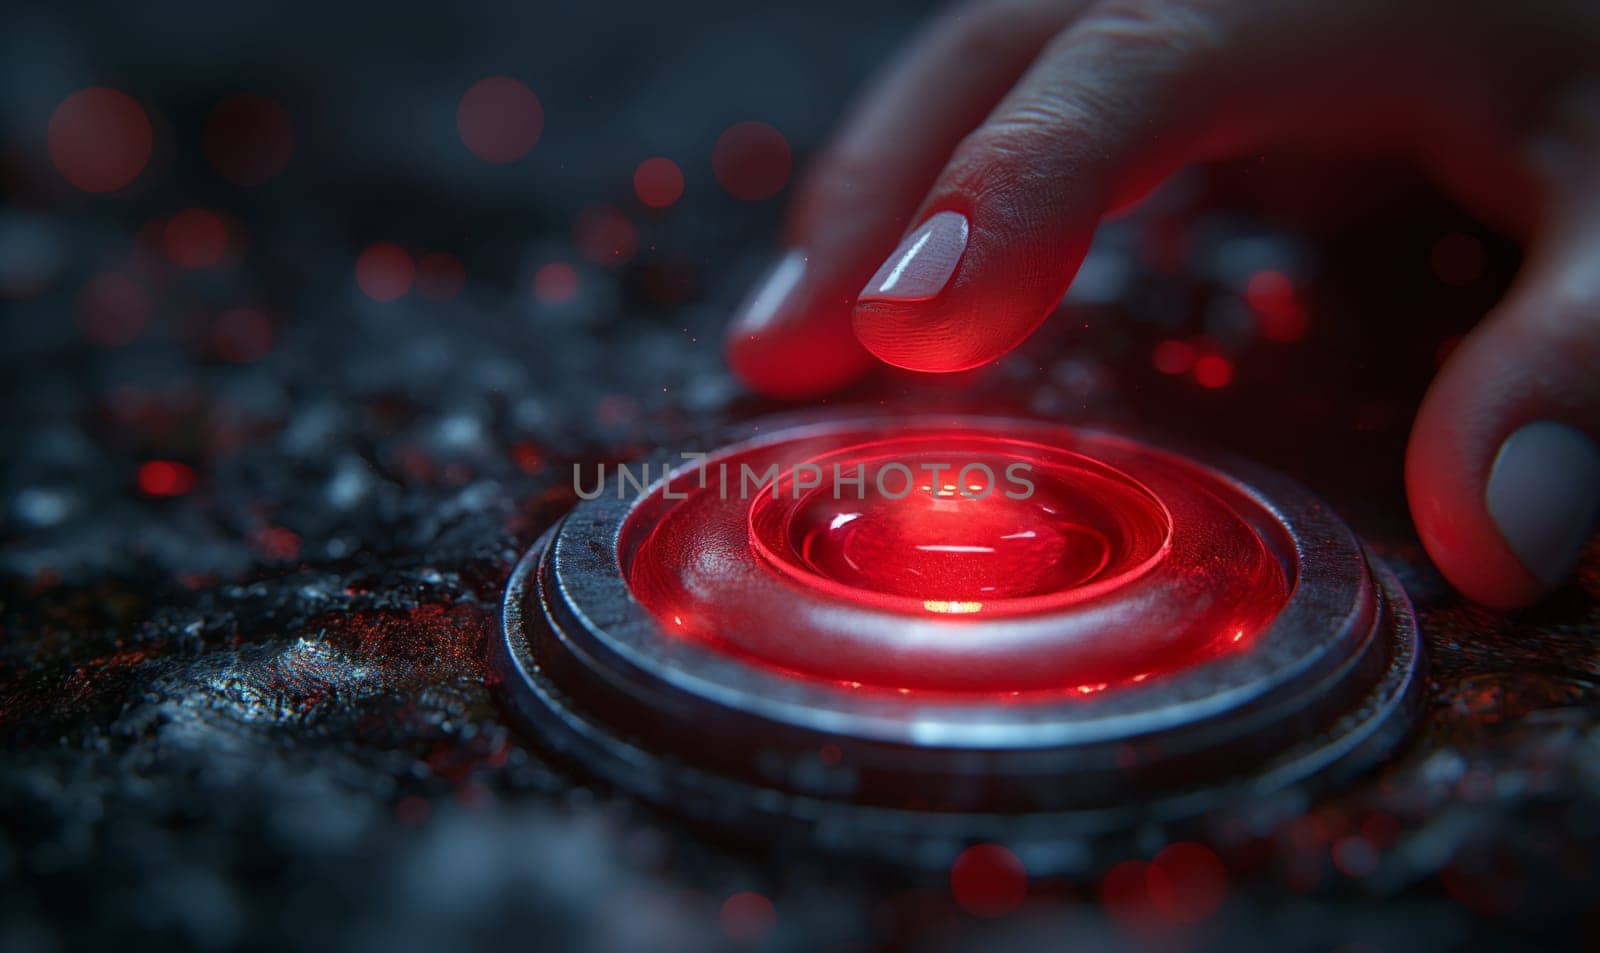 The hand touches the red button. by Fischeron